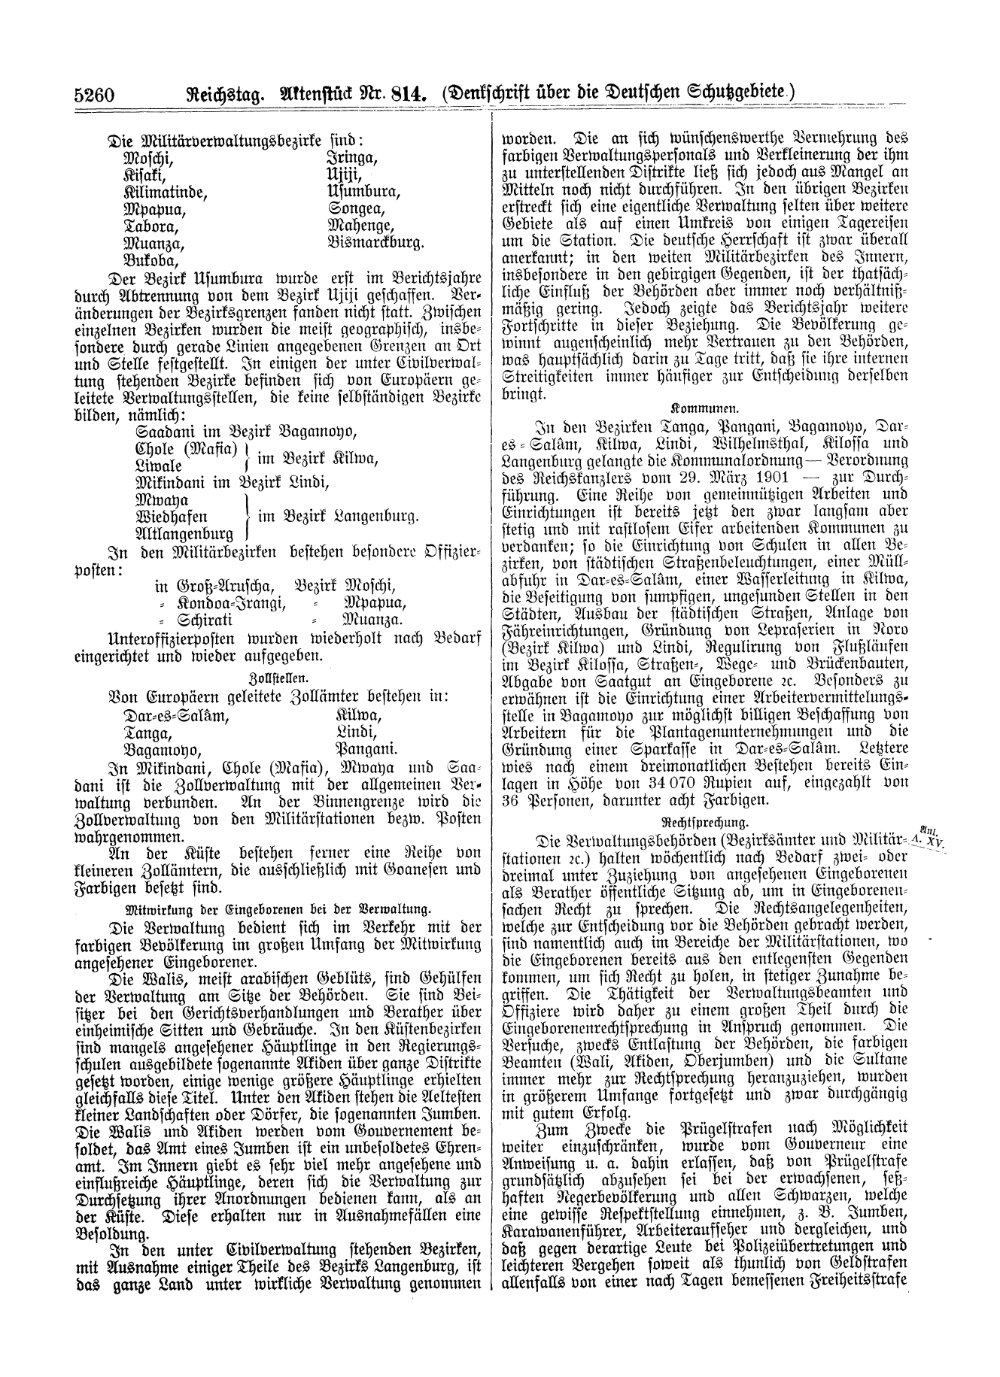 Scan of page 5260